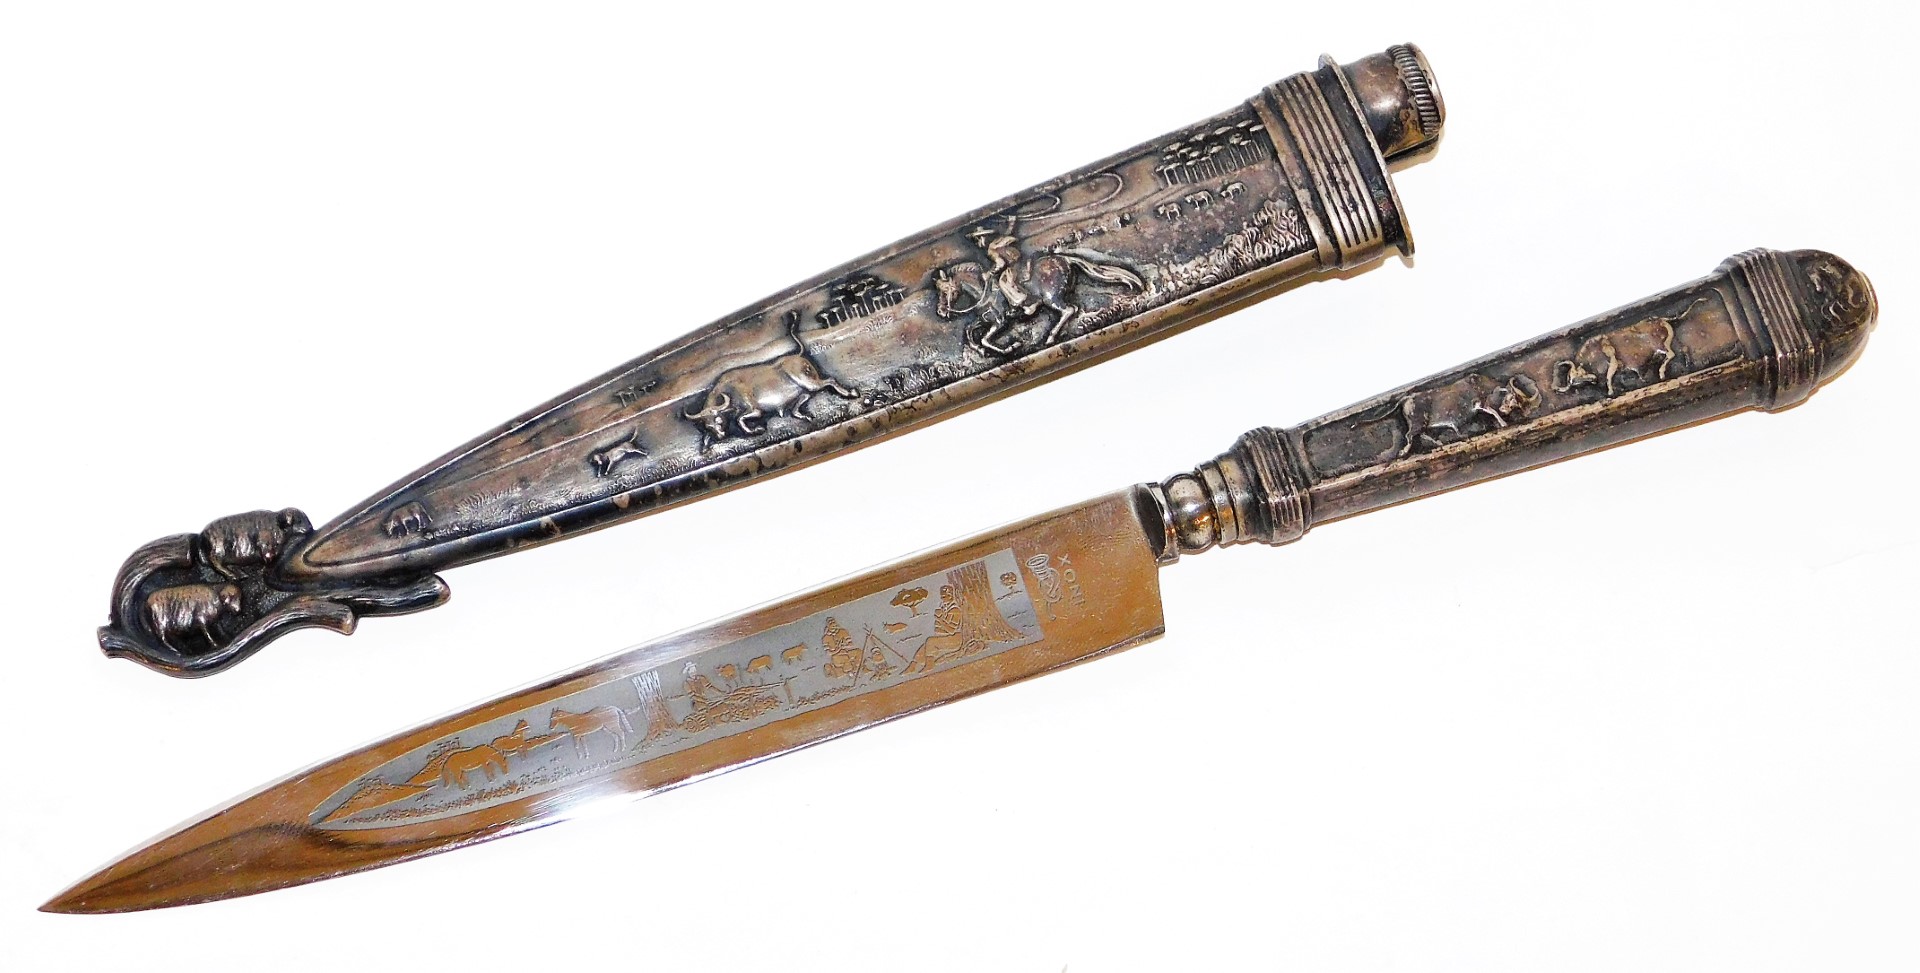 An Inox hunting knife, in a silver plated scabbard, heavily embossed with cattle scenes, of cows, bu